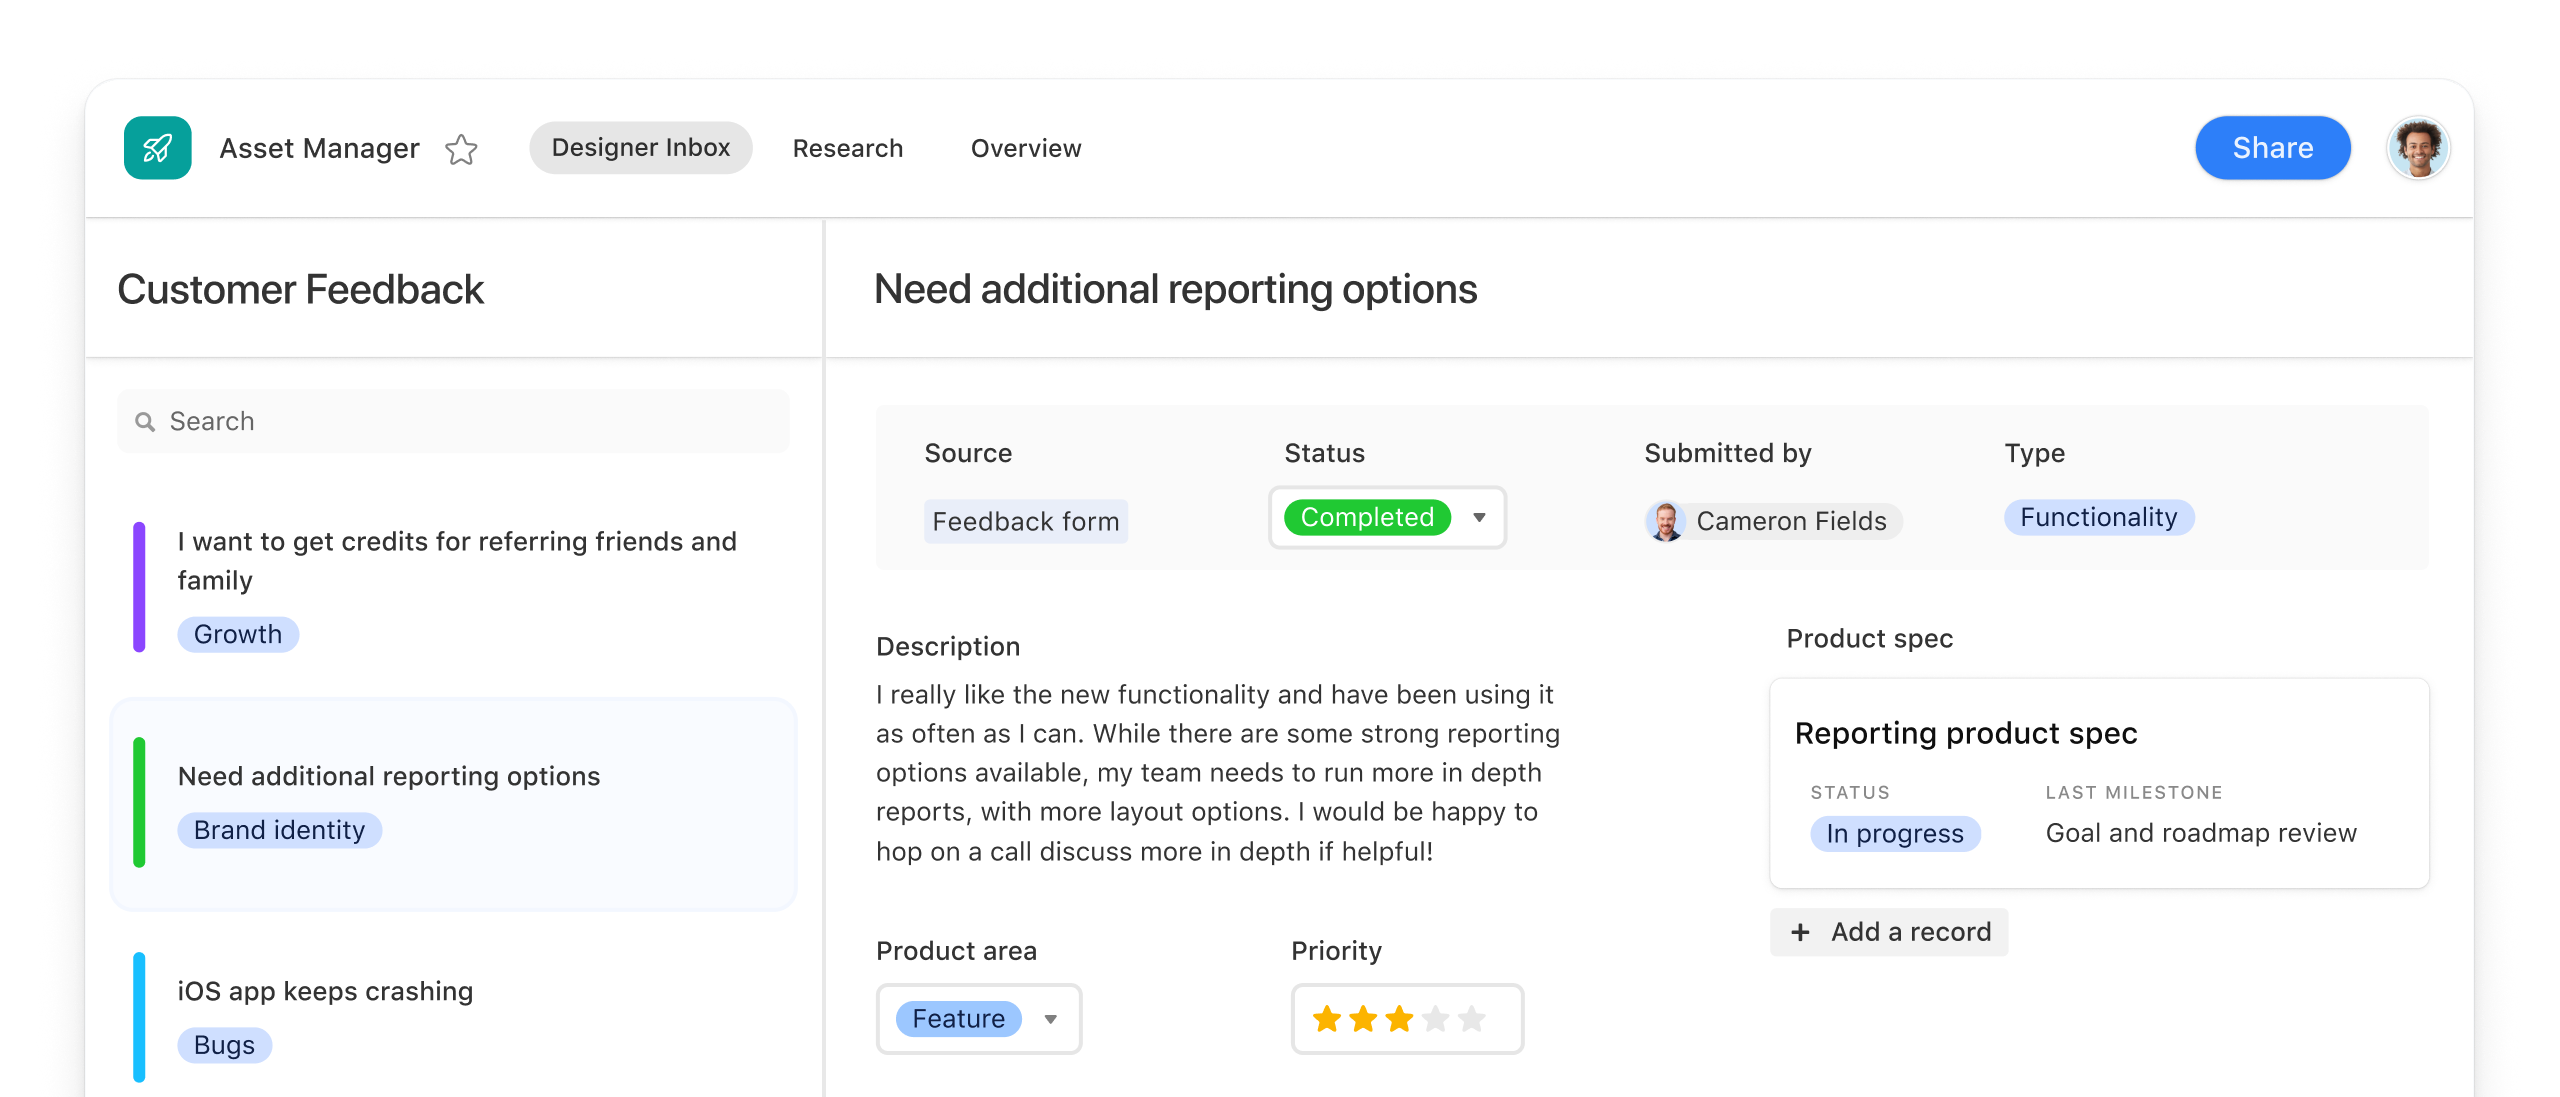 An interface for customer feedback shows feedback status, source, and type.